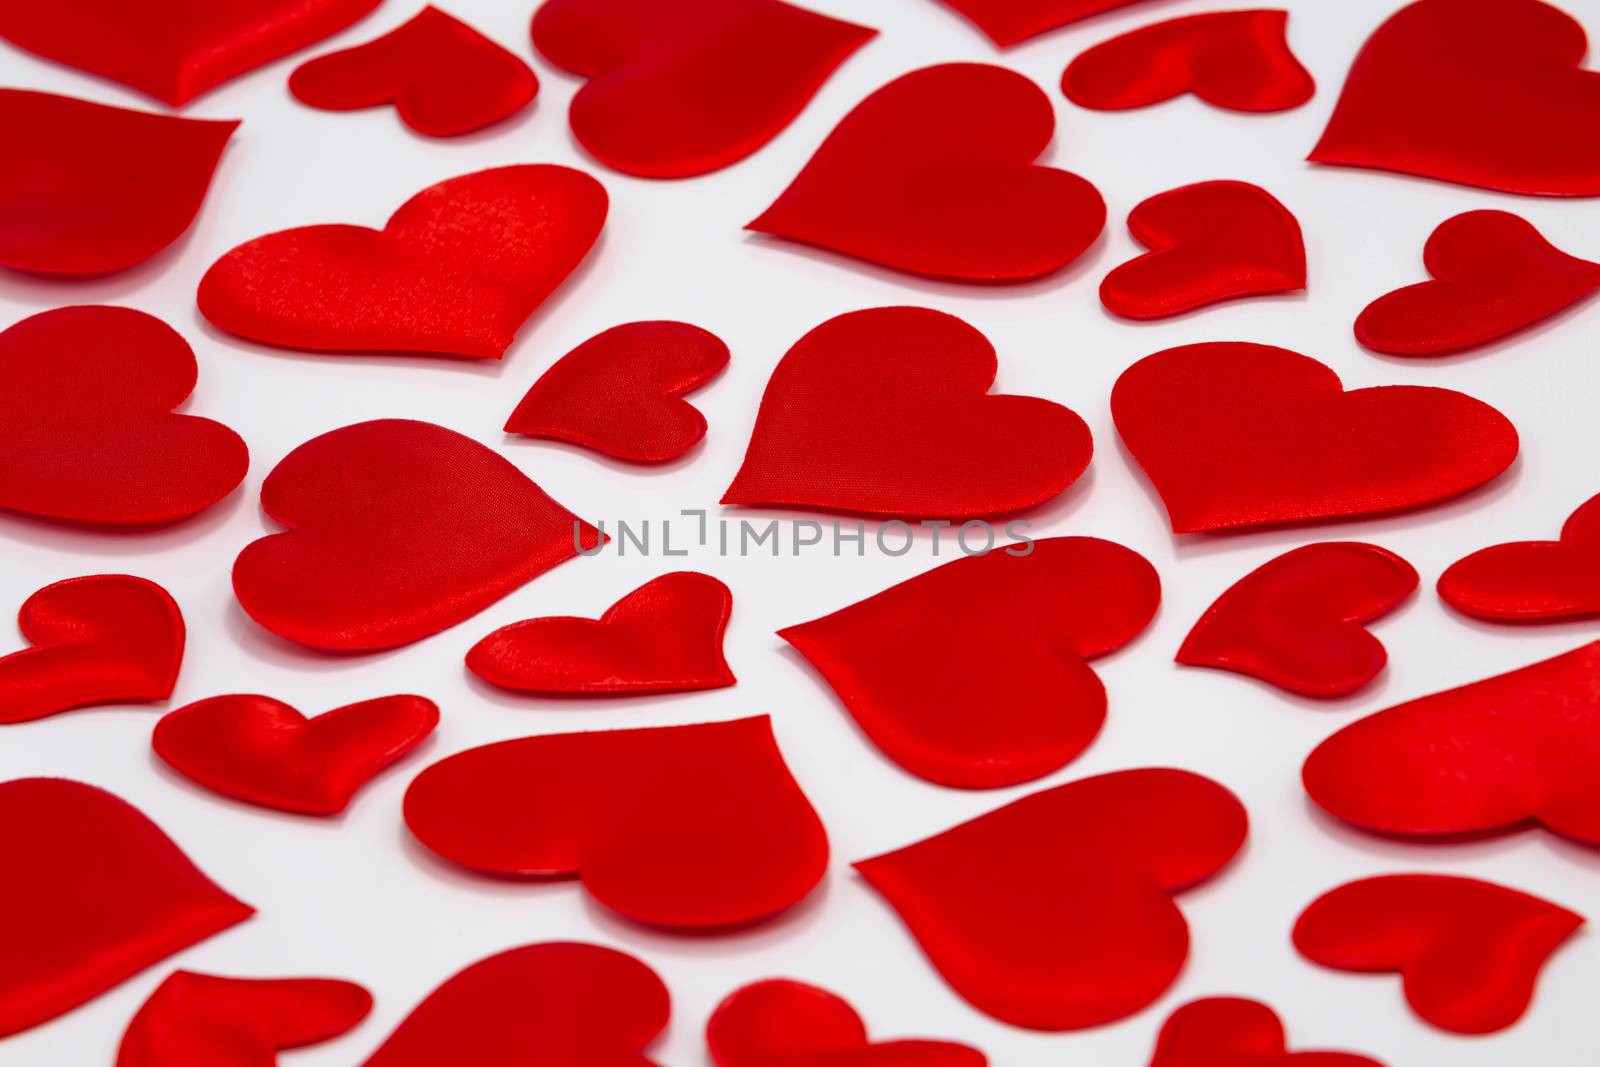 Scattered Red Hearts on White Background. Top view by DamantisZ